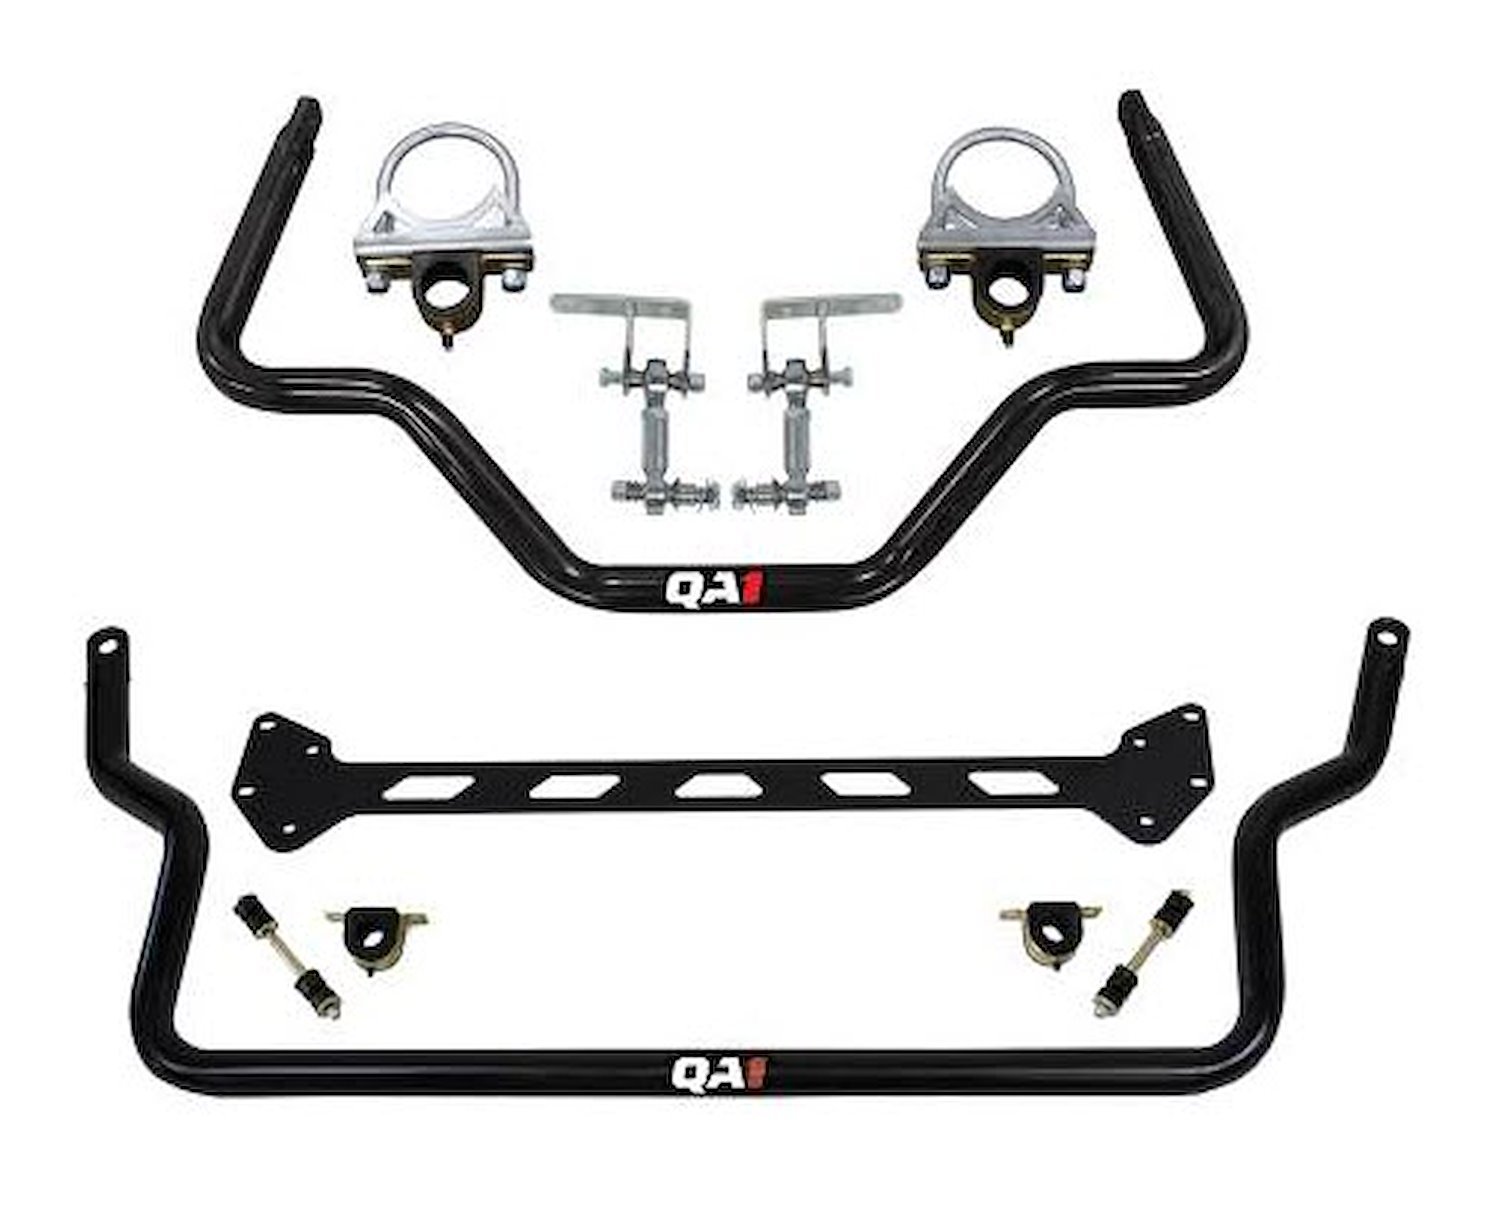 High Clearance Front and Axle Mount Rear Sway